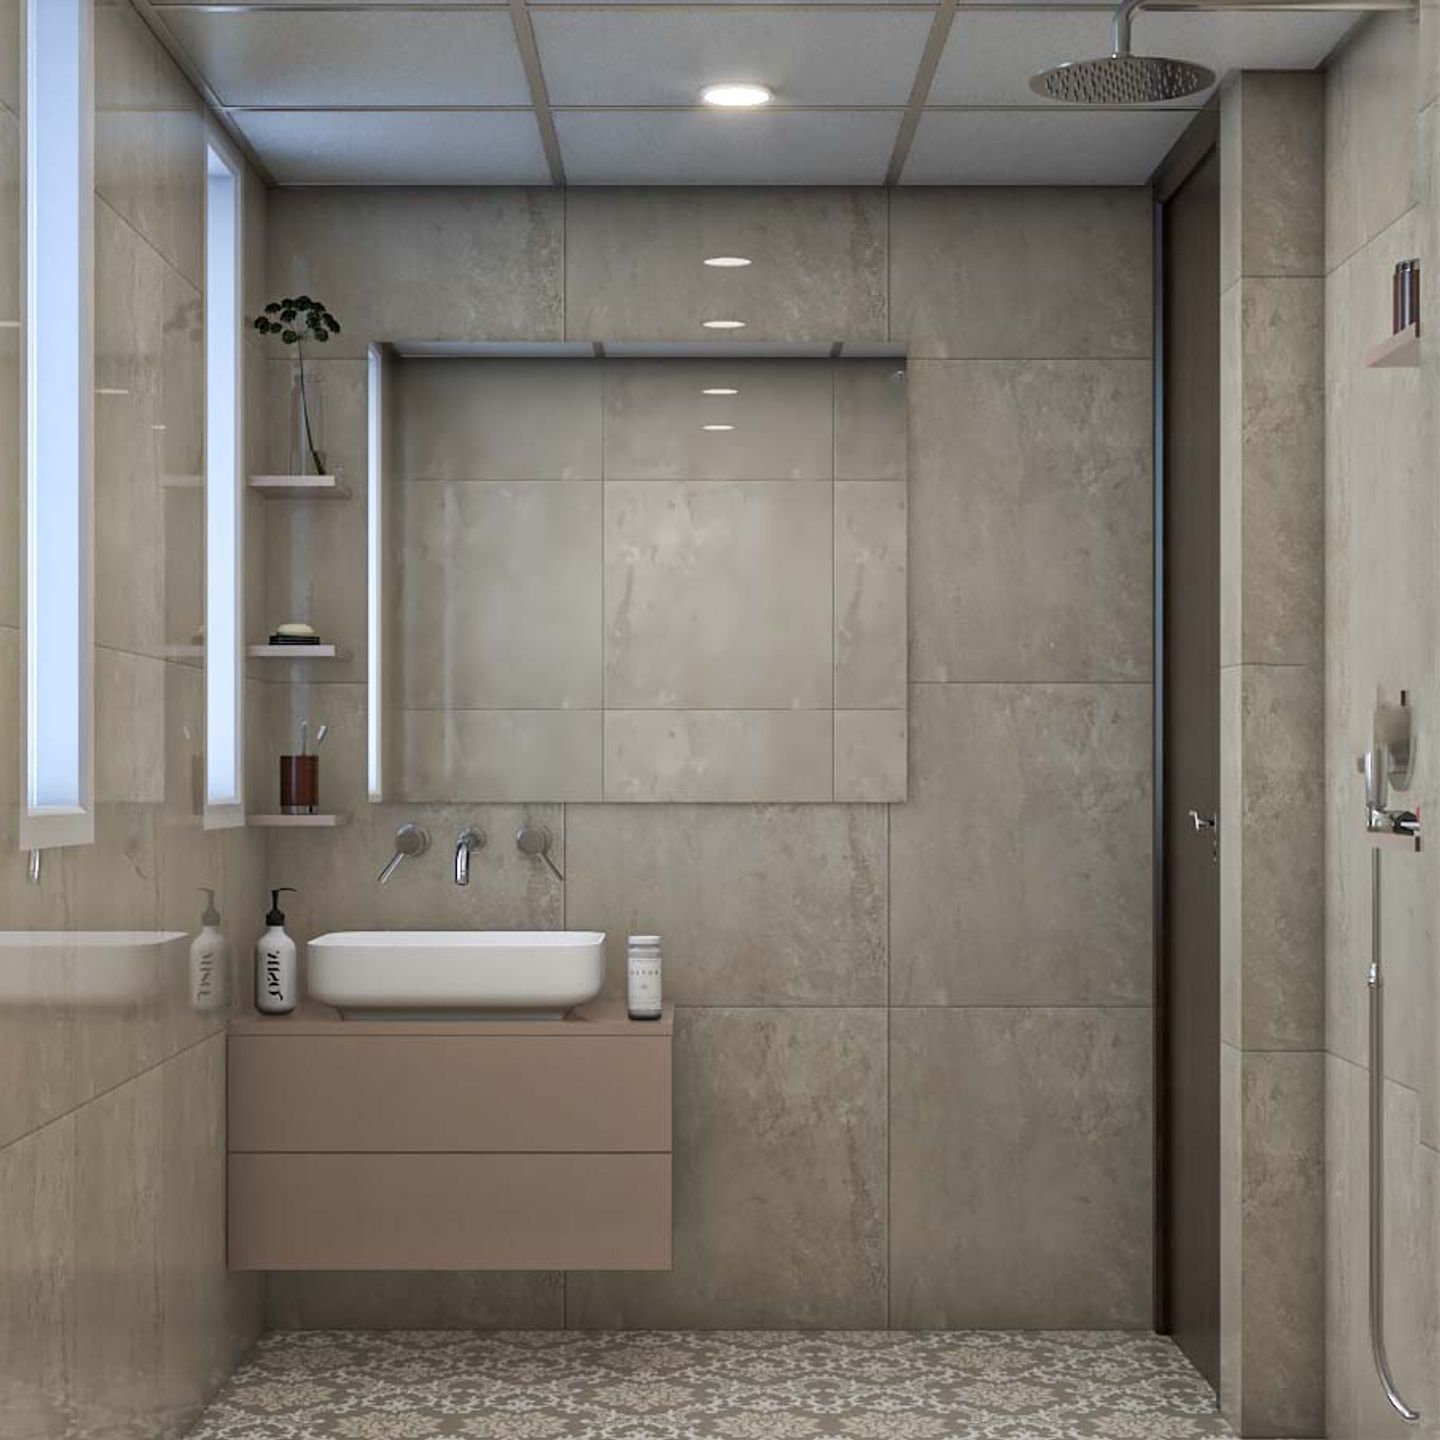 Contemporary Bathroom Design With Beige Wall And Floor Tiles